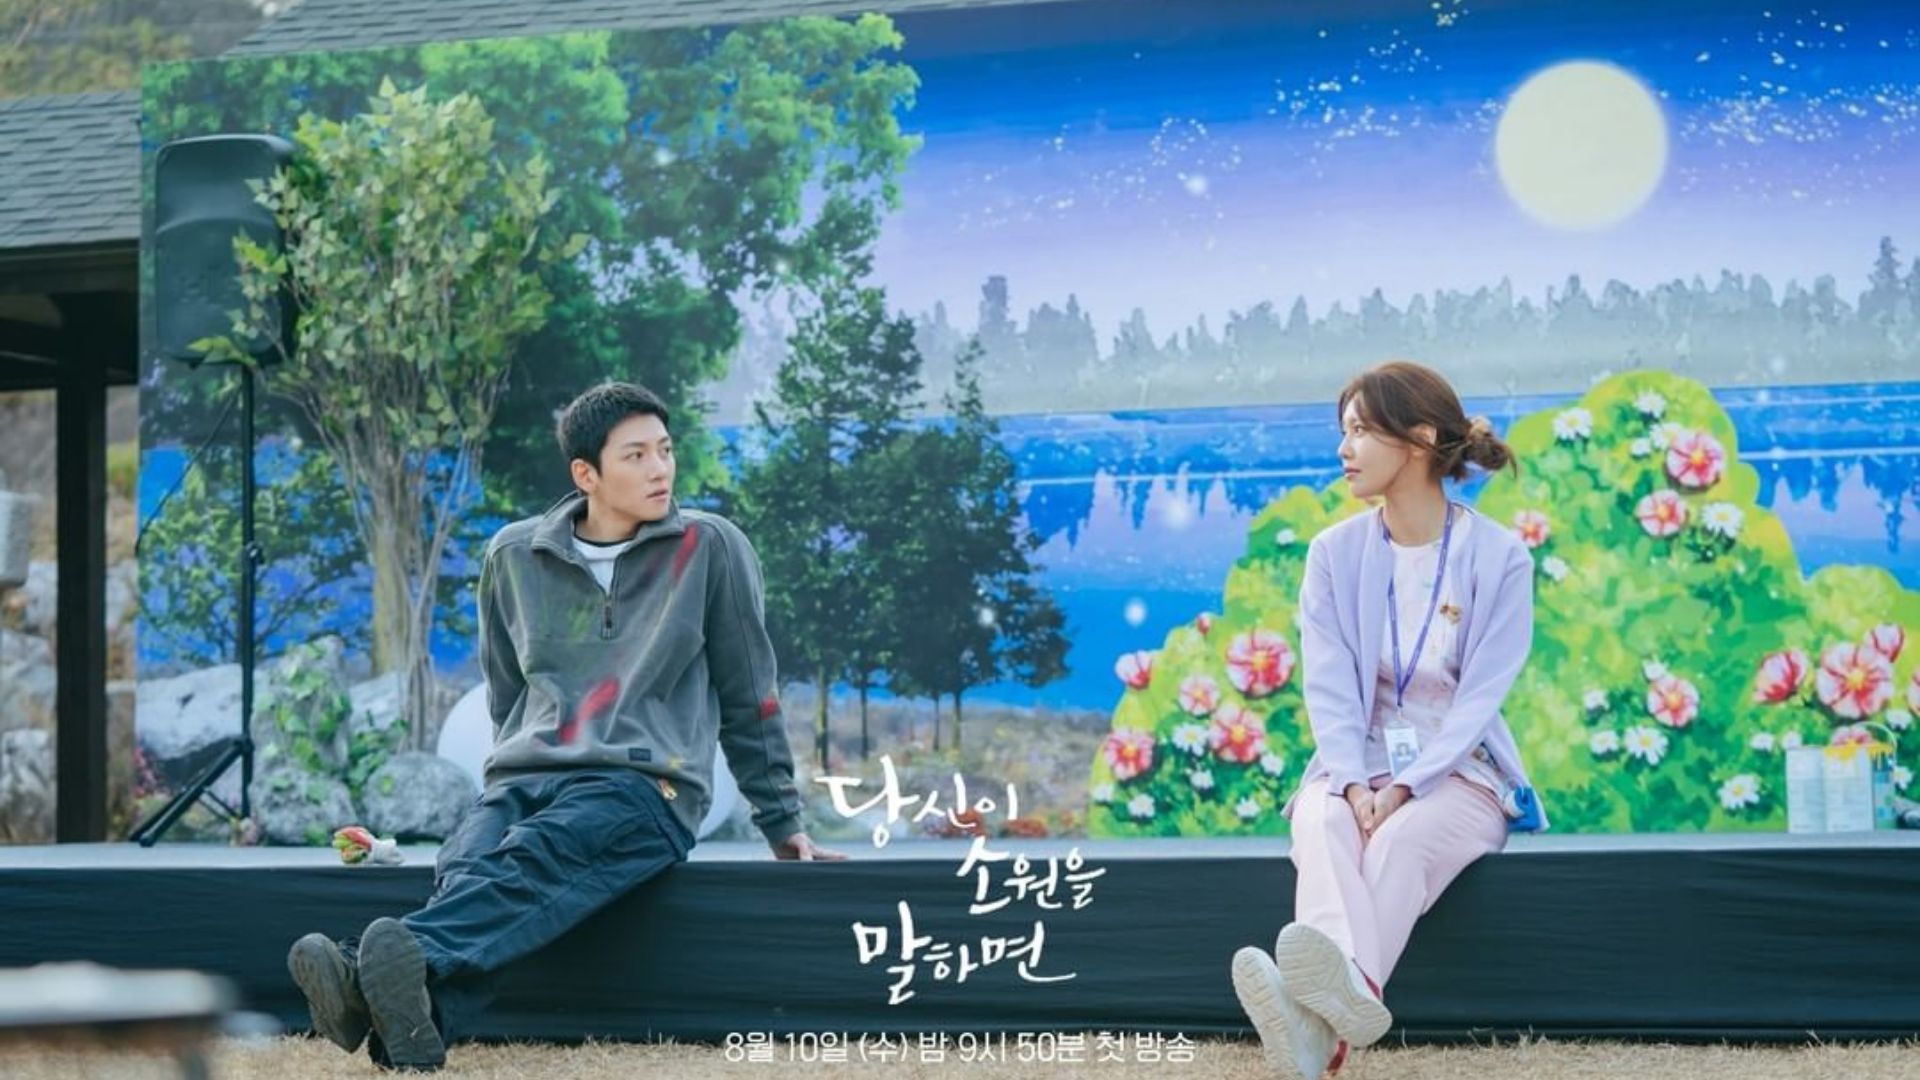 August K-drama: If you wish upon me